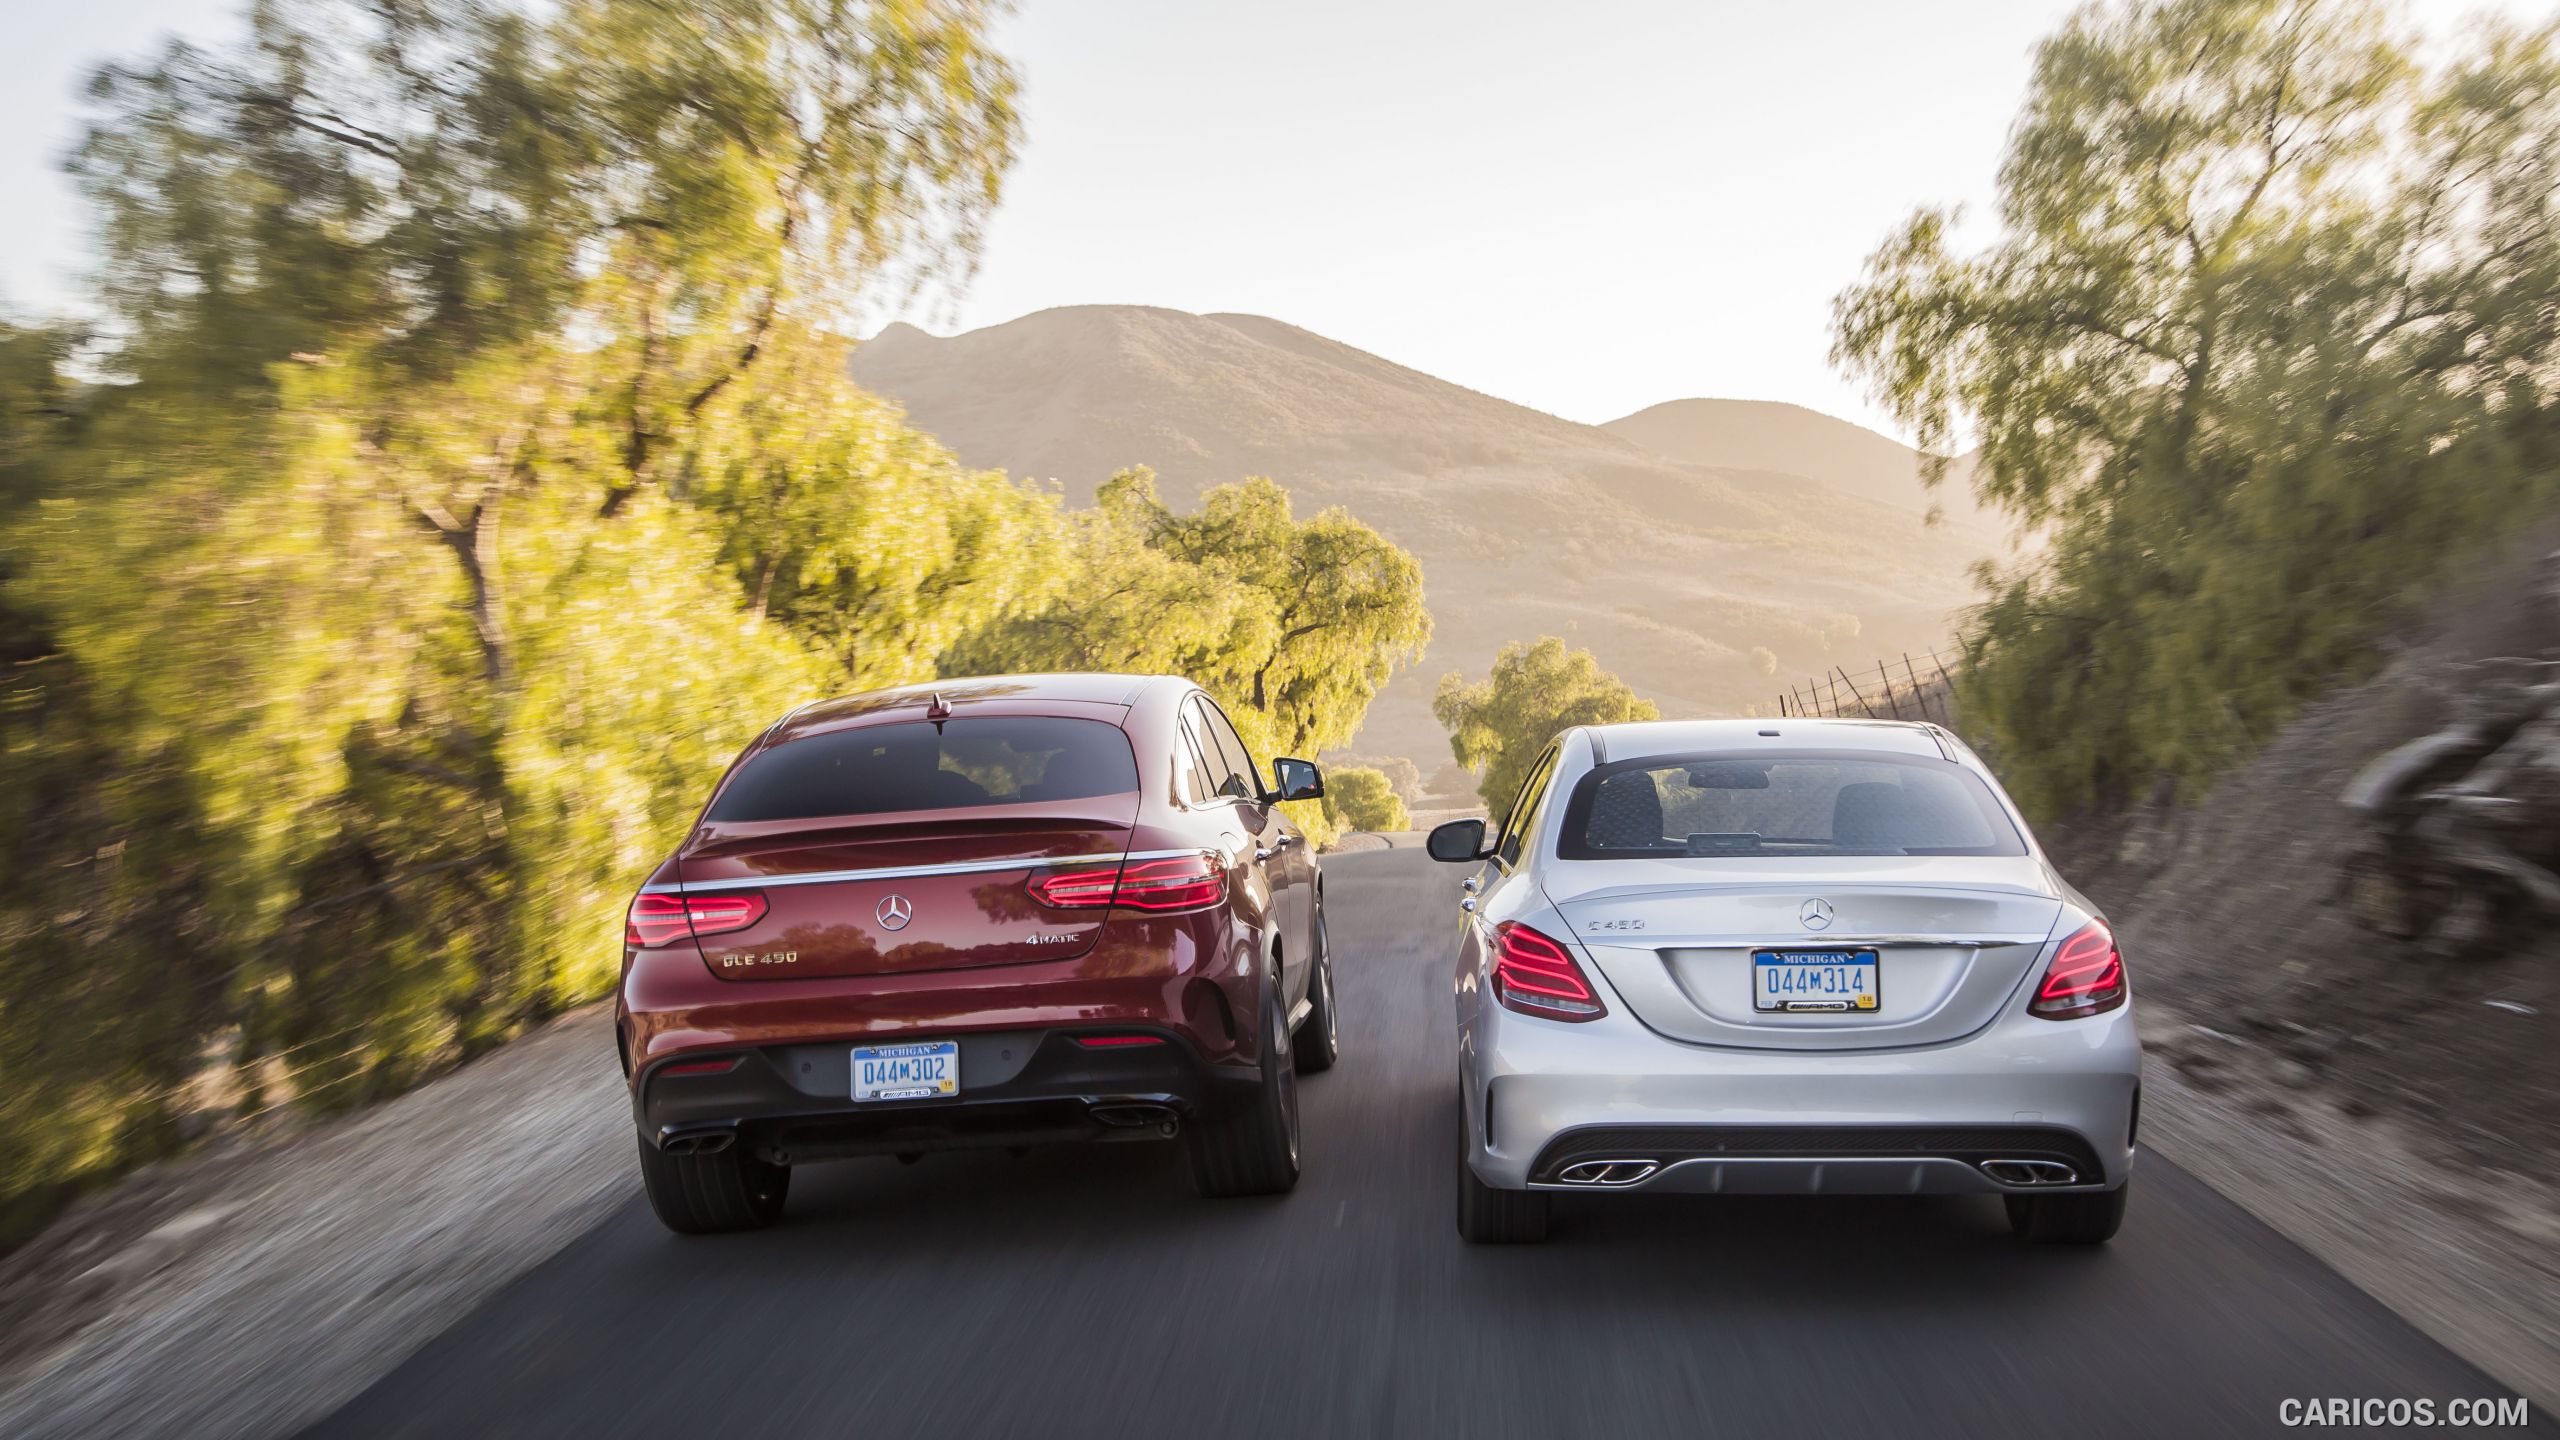 2016 Mercedes-Benz C450 AMG Sedan (US-Spec) and Mercedes-Benz GLE 450 AMG Coupe - Rear, #84 of 122